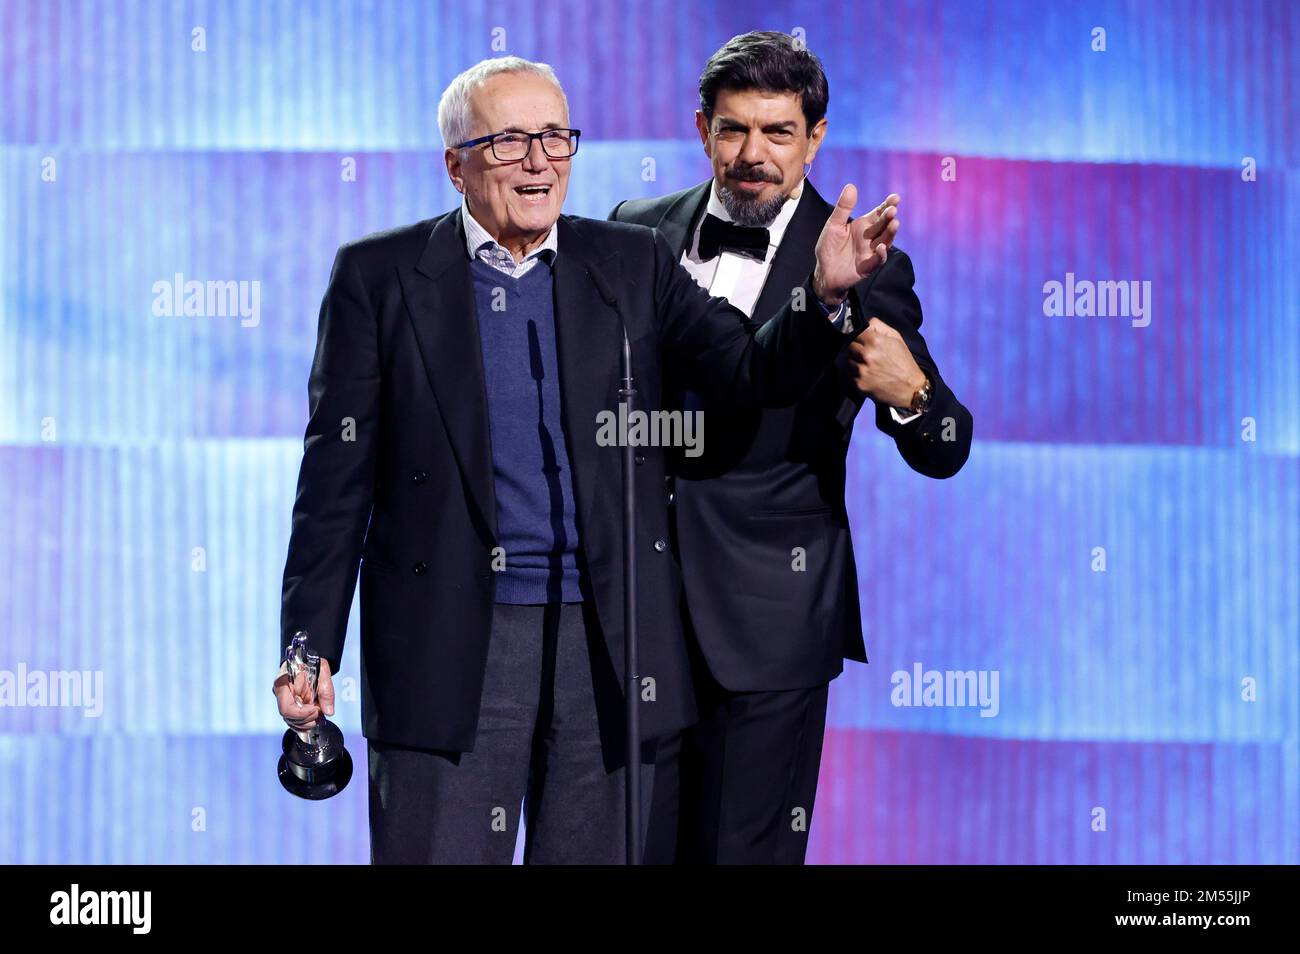 https://c8.alamy.com/comp/2M55JJP/marco-bellocchio-and-pierfrancesco-favino-attending-the-35th-european-film-awards-2022-at-harpa-conference-and-concert-hall-on-december-10-2022-in-reykjavik-iceland-2M55JJP.jpg